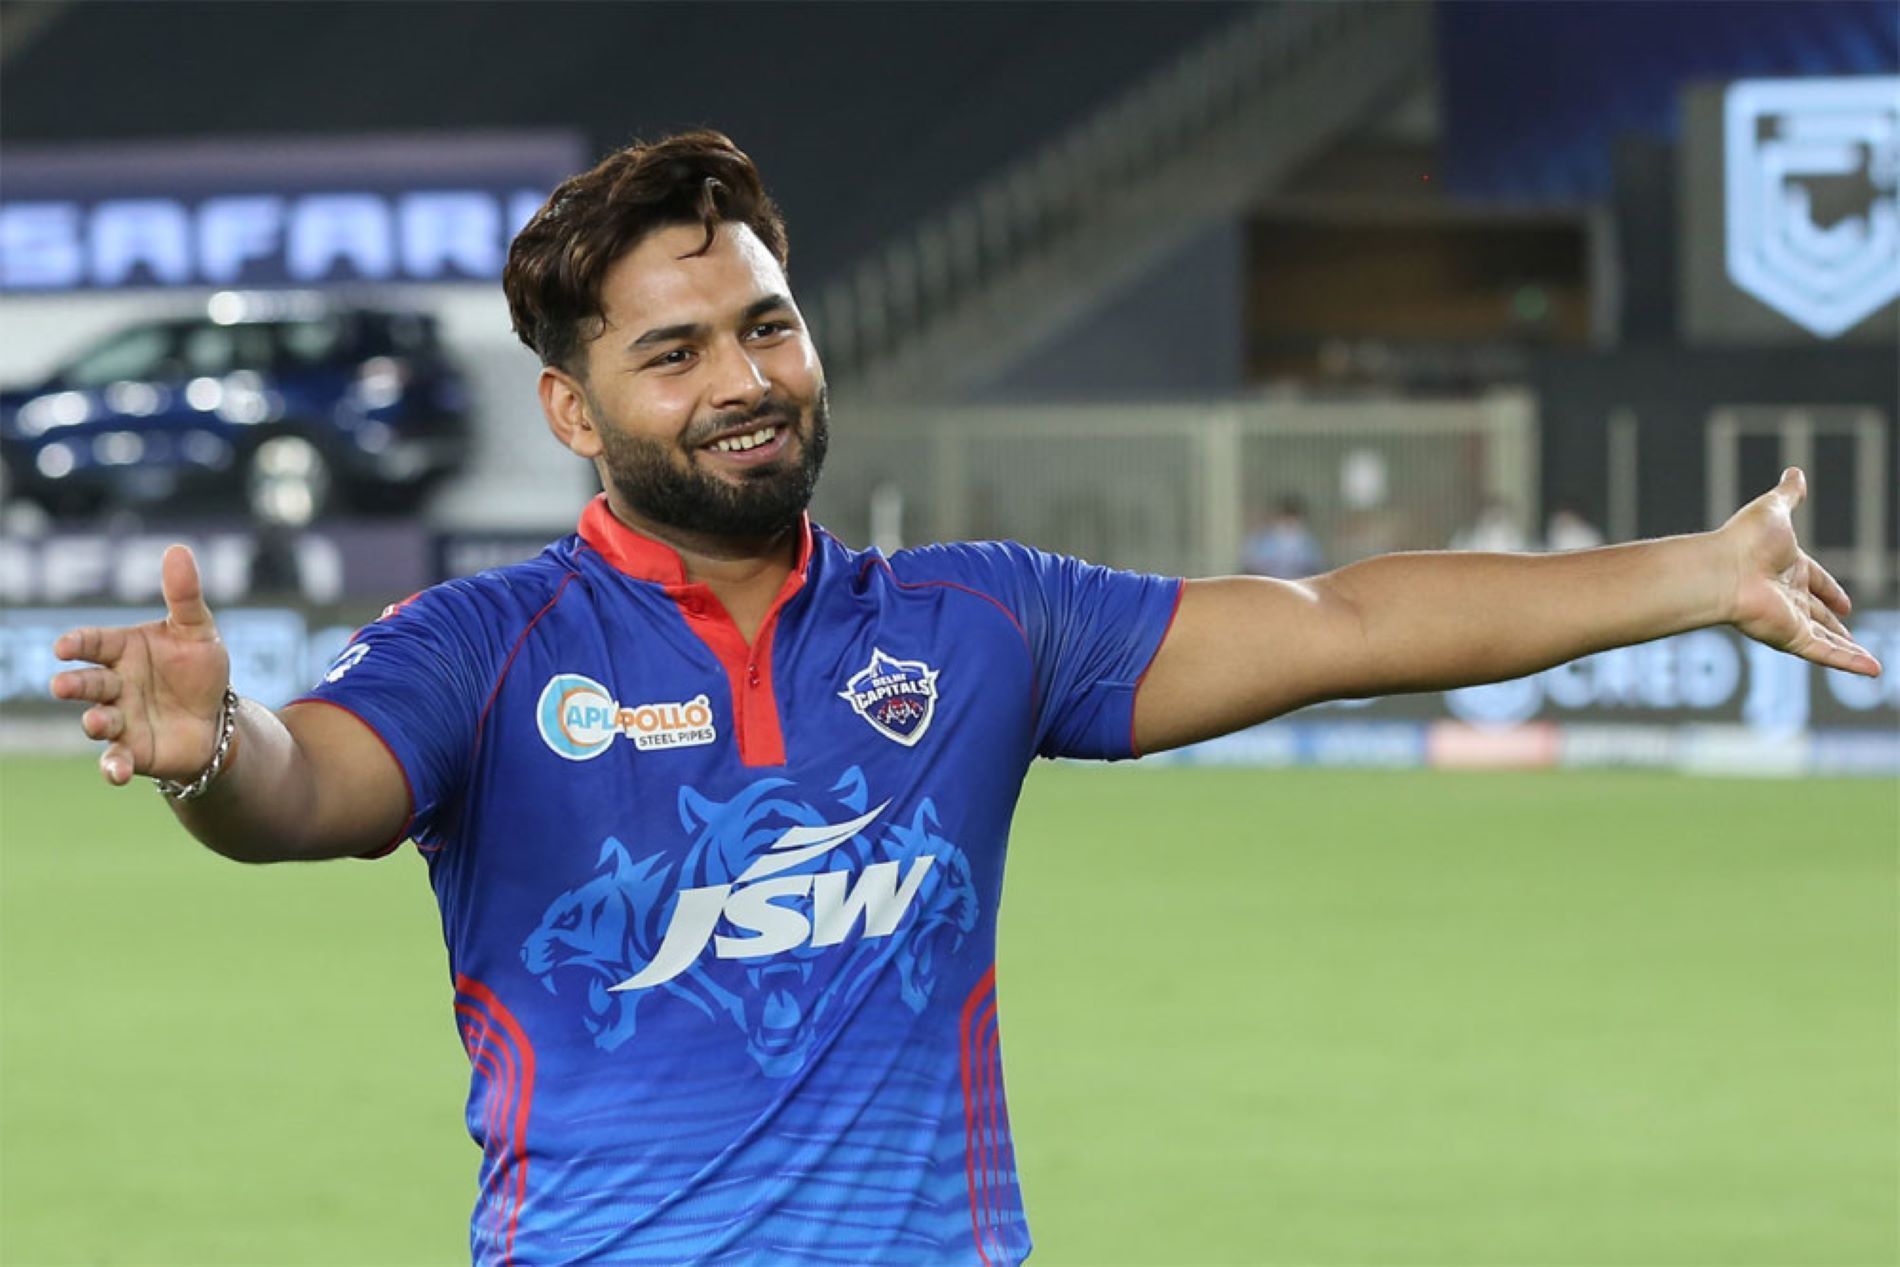 Rishabh Pant is likely to attend DC